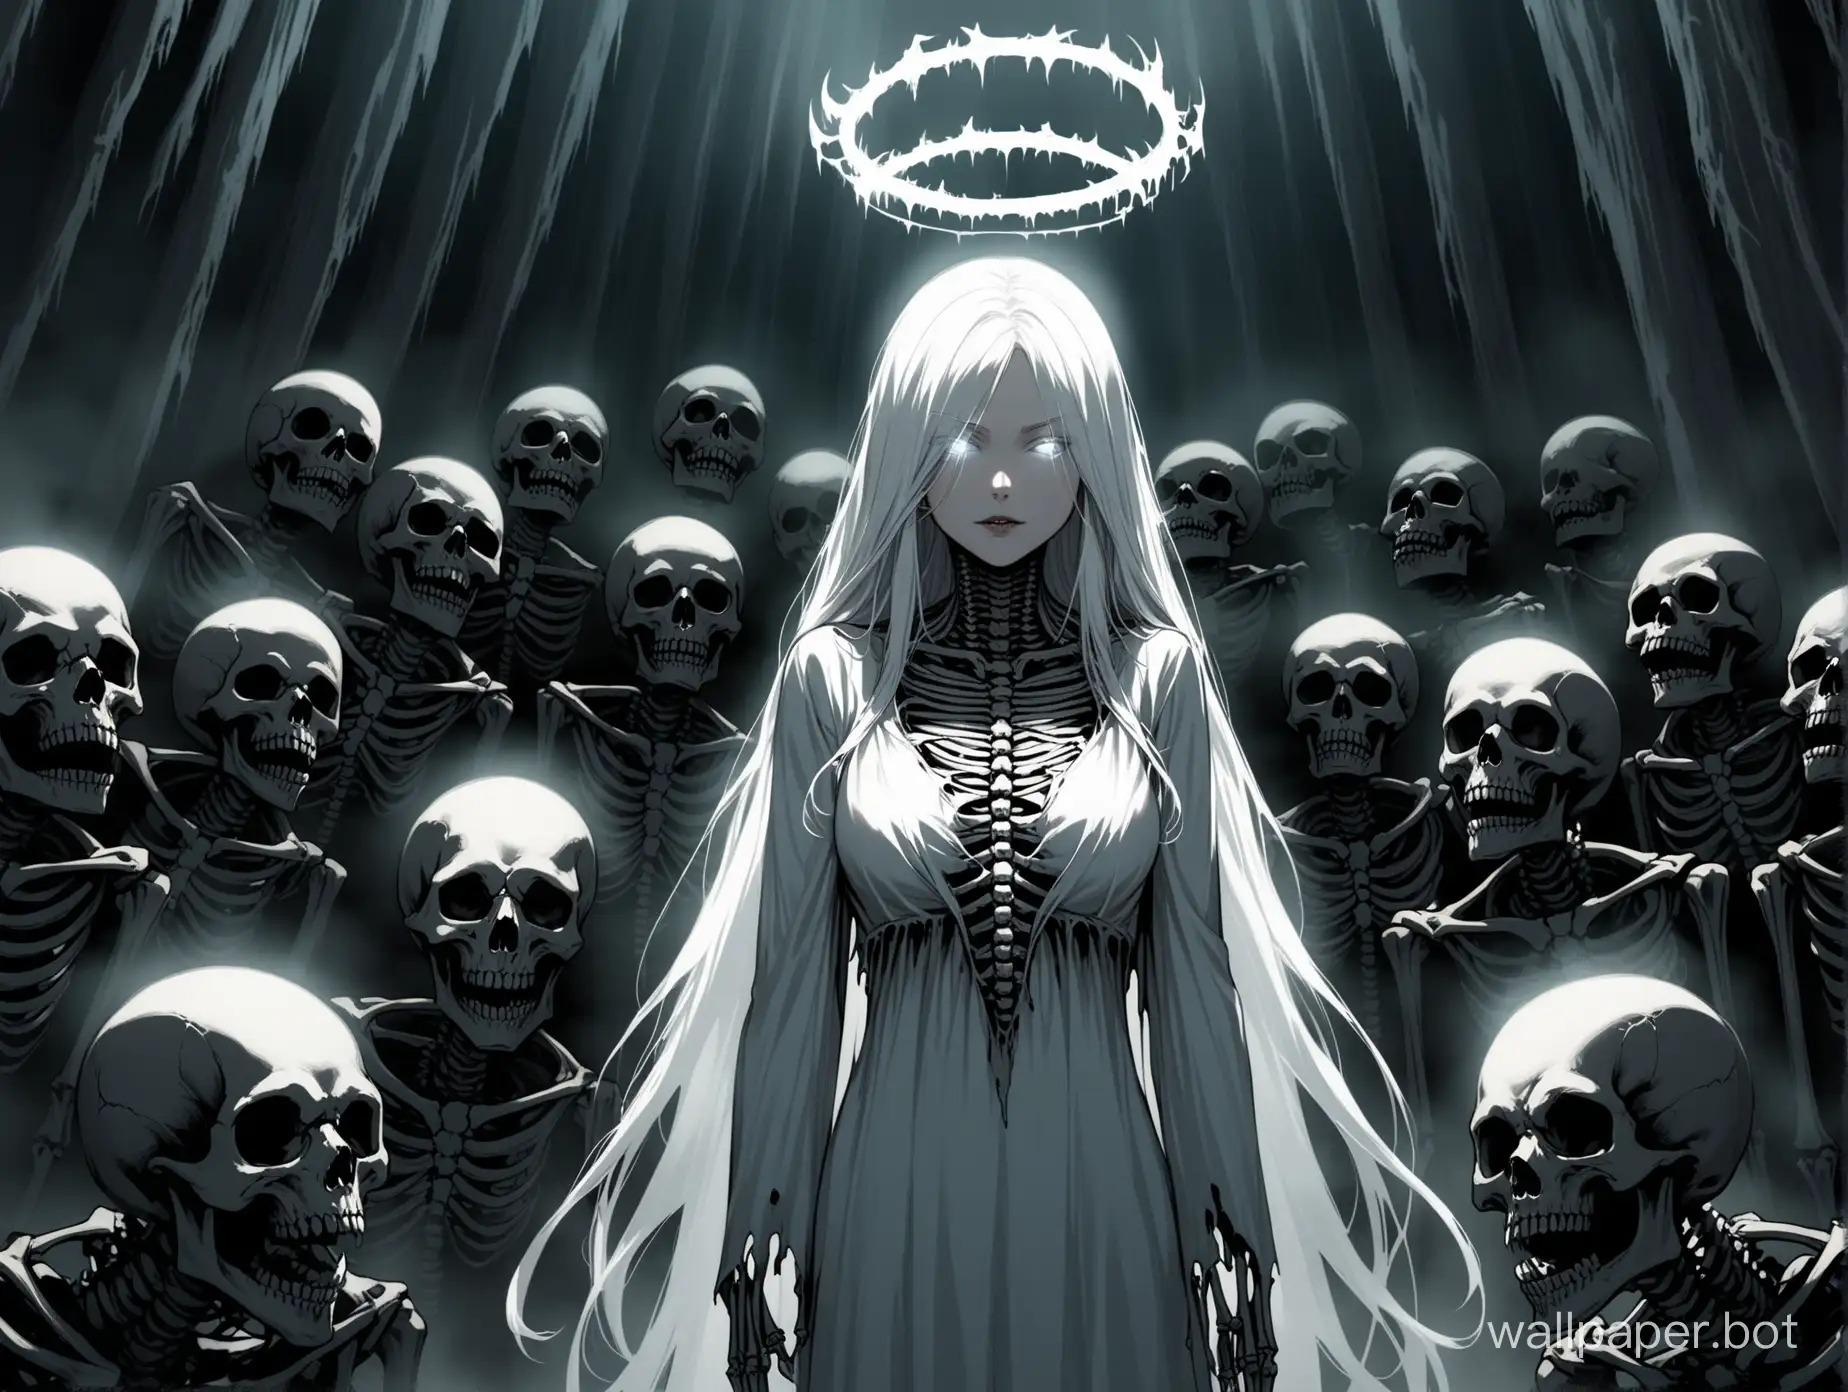 A white female with white hair and a white halo that has an unholy dark aura and a background of sinister skeletons